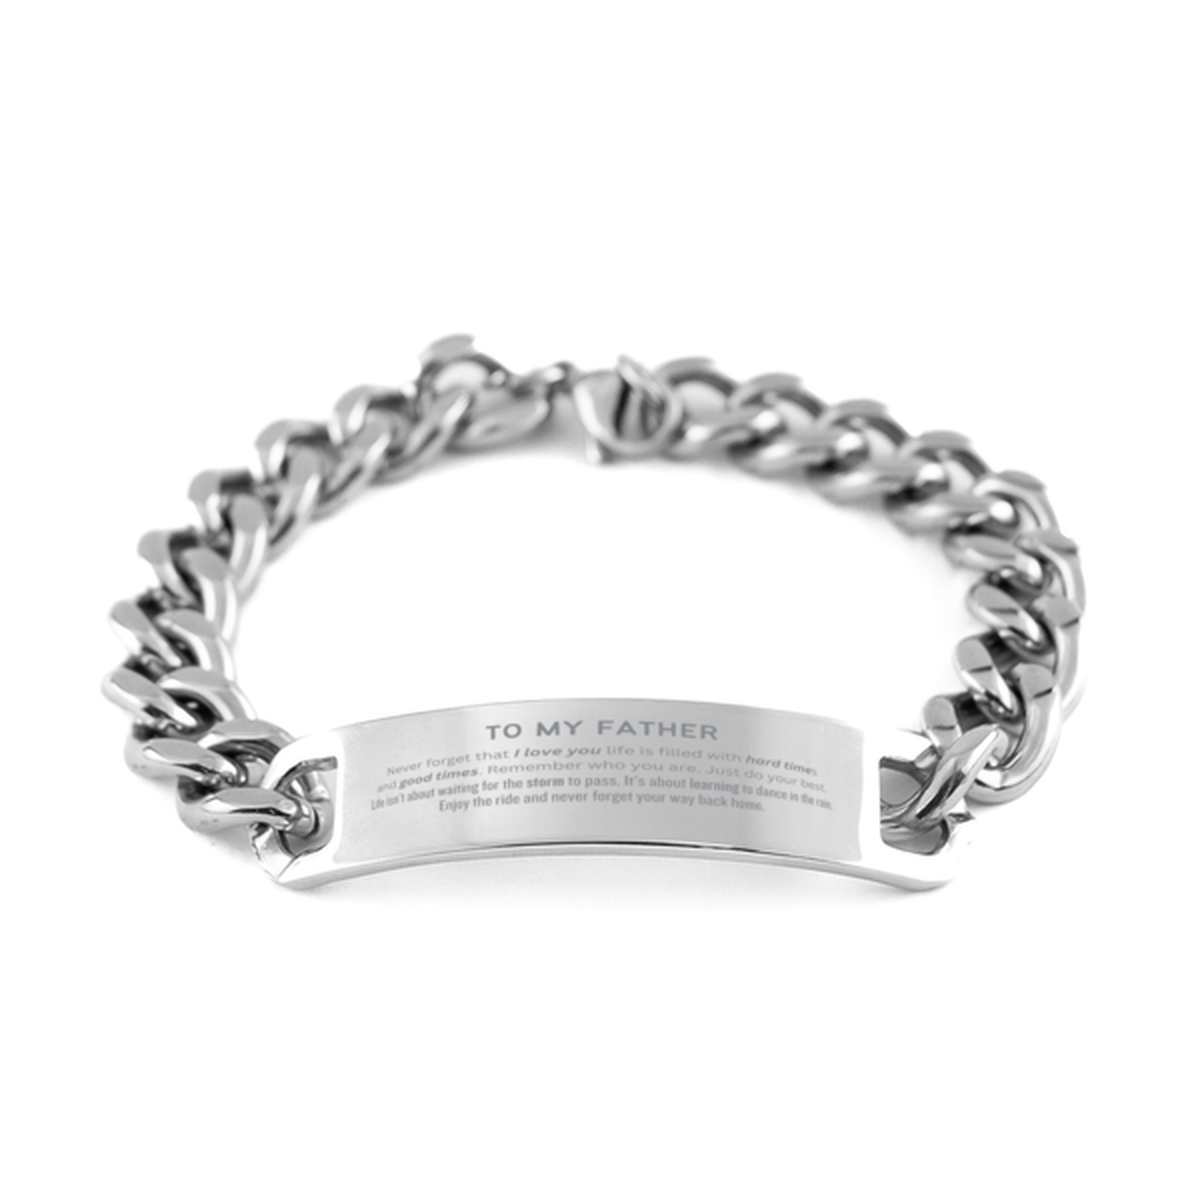 Christmas Father Cuban Chain Stainless Steel Bracelet Gifts, To My Father Birthday Thank You Gifts For Father, Graduation Unique Gifts For Father To My Father Never forget that I love you life is filled with hard times and good times. Remember who you are